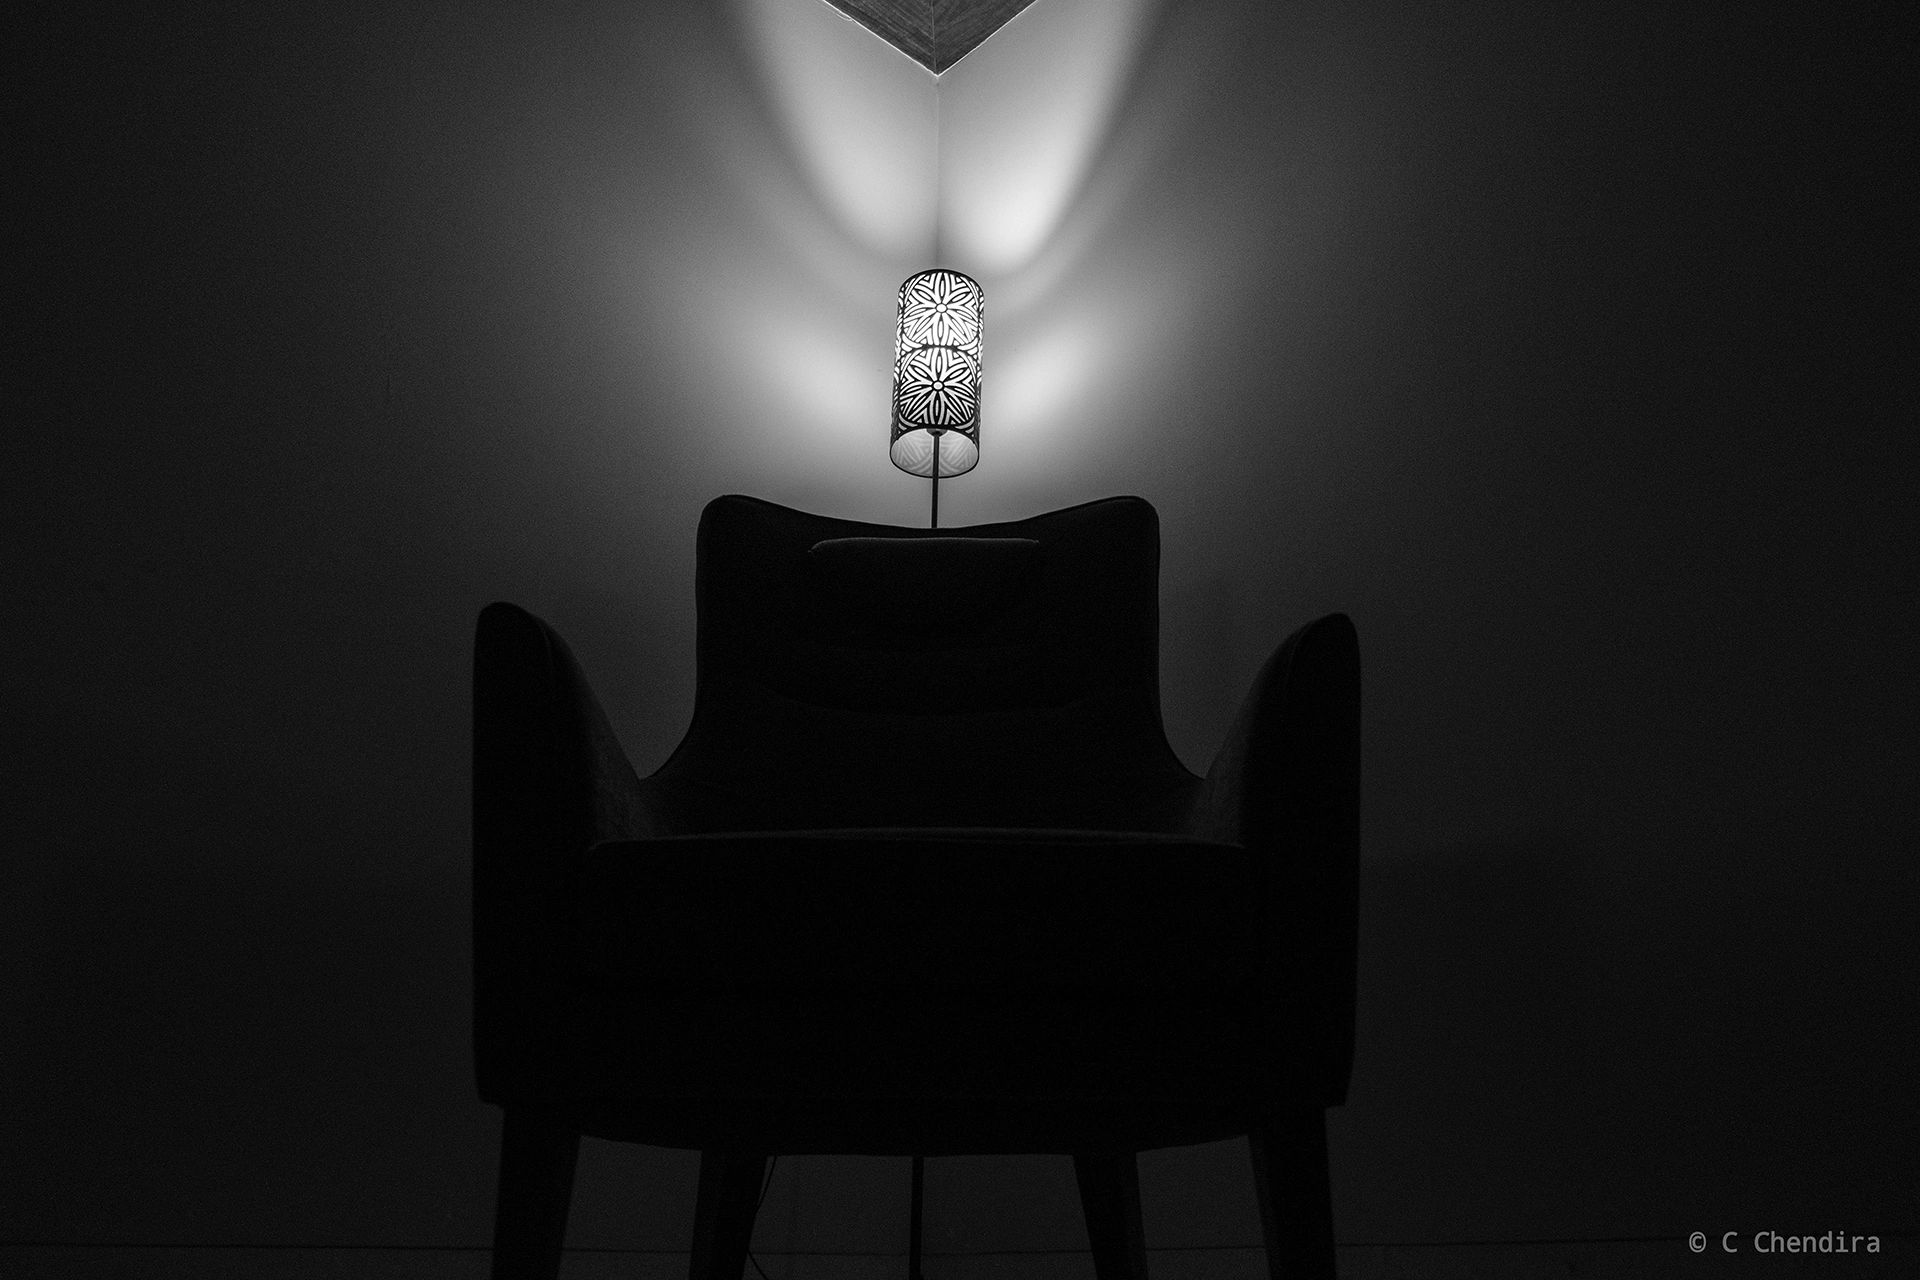 Accent chair silhouette with lighting effect. Black & white. 1/125; f/2.6; ISO-1250; 18 mm APS-C